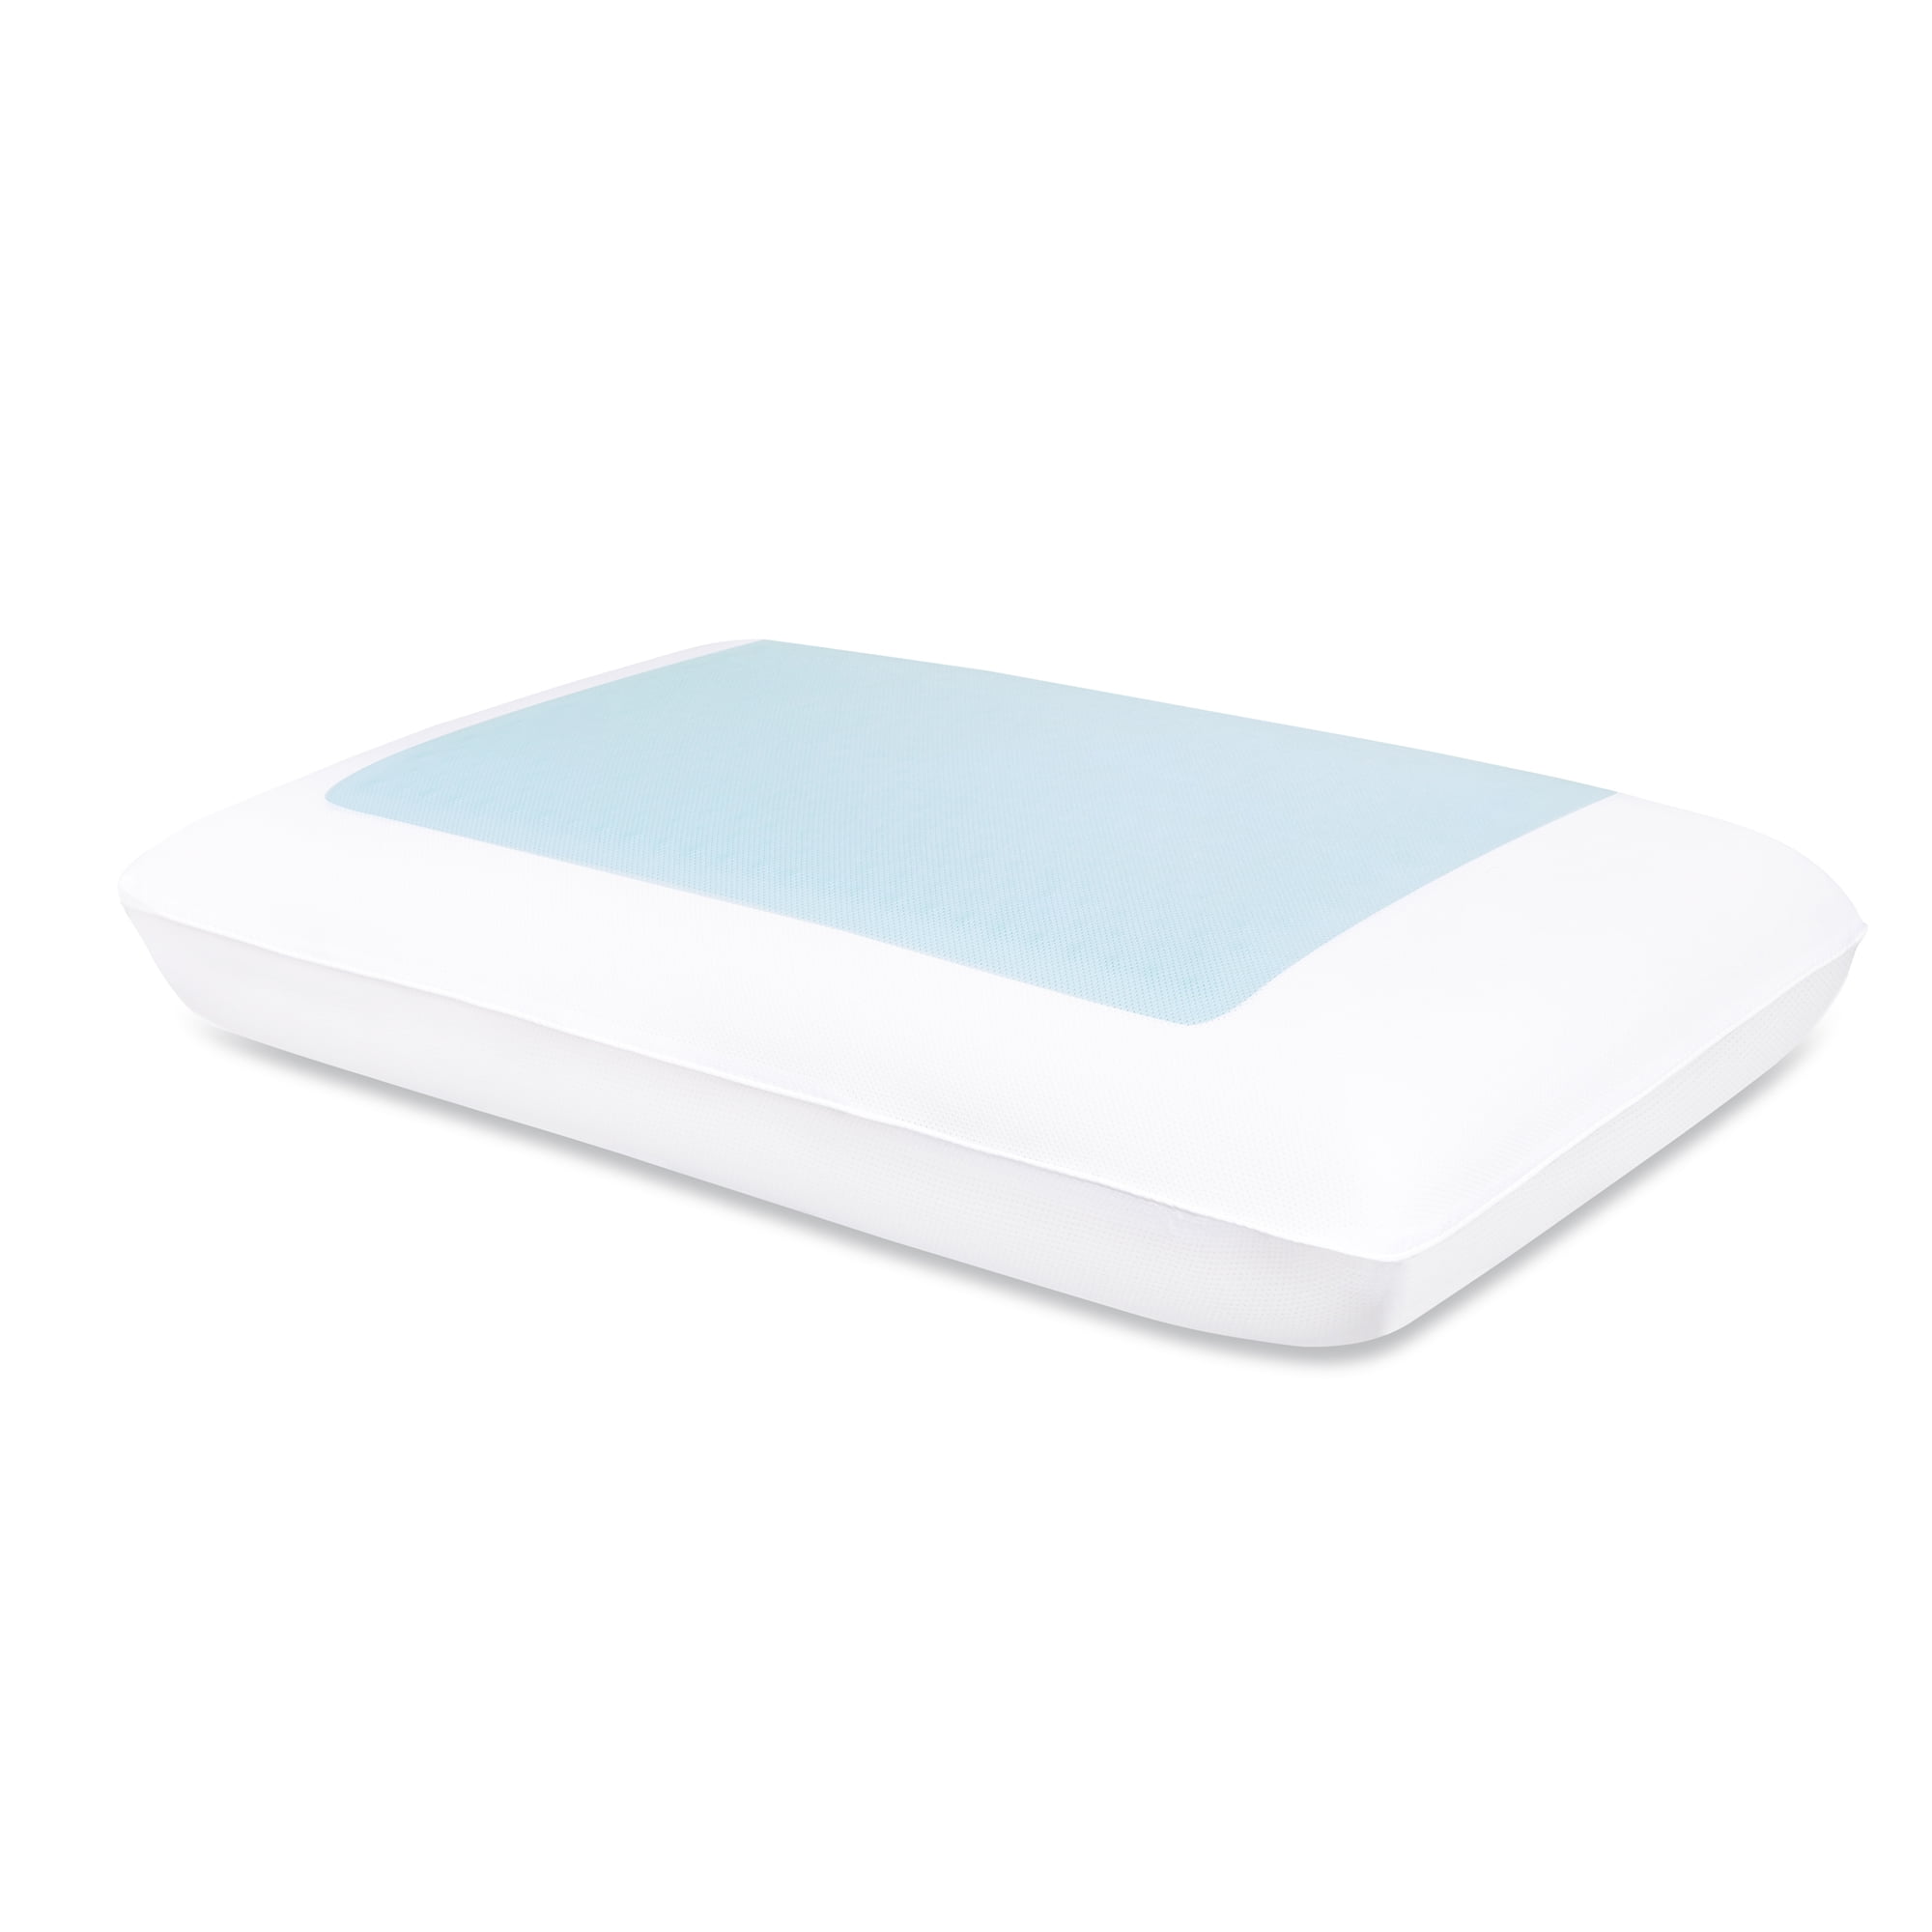 Details about    Soft Surroundings Ice Gel Pillow Queen 